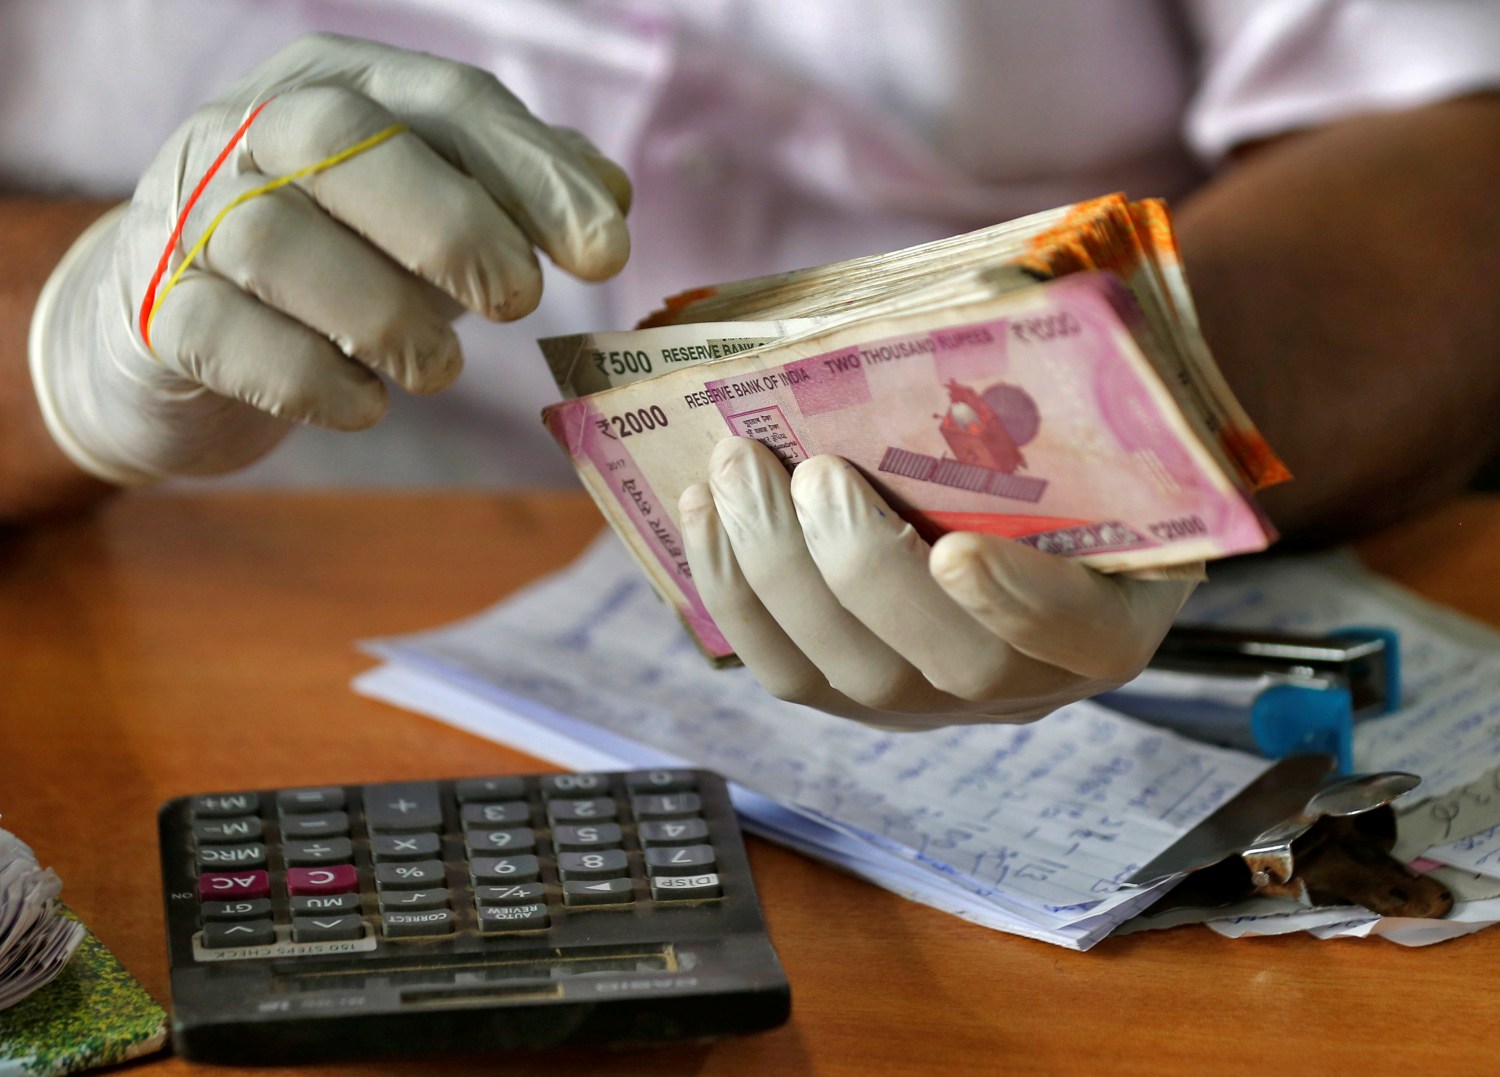 A trader wearing protective hand gloves counts Indian currency notes at a market during a 21-day nationwide lockdown to limit the spreading of coronavirus disease (COVID-19), in Kochi, India, March 27, 2020. REUTERS/Sivaram V